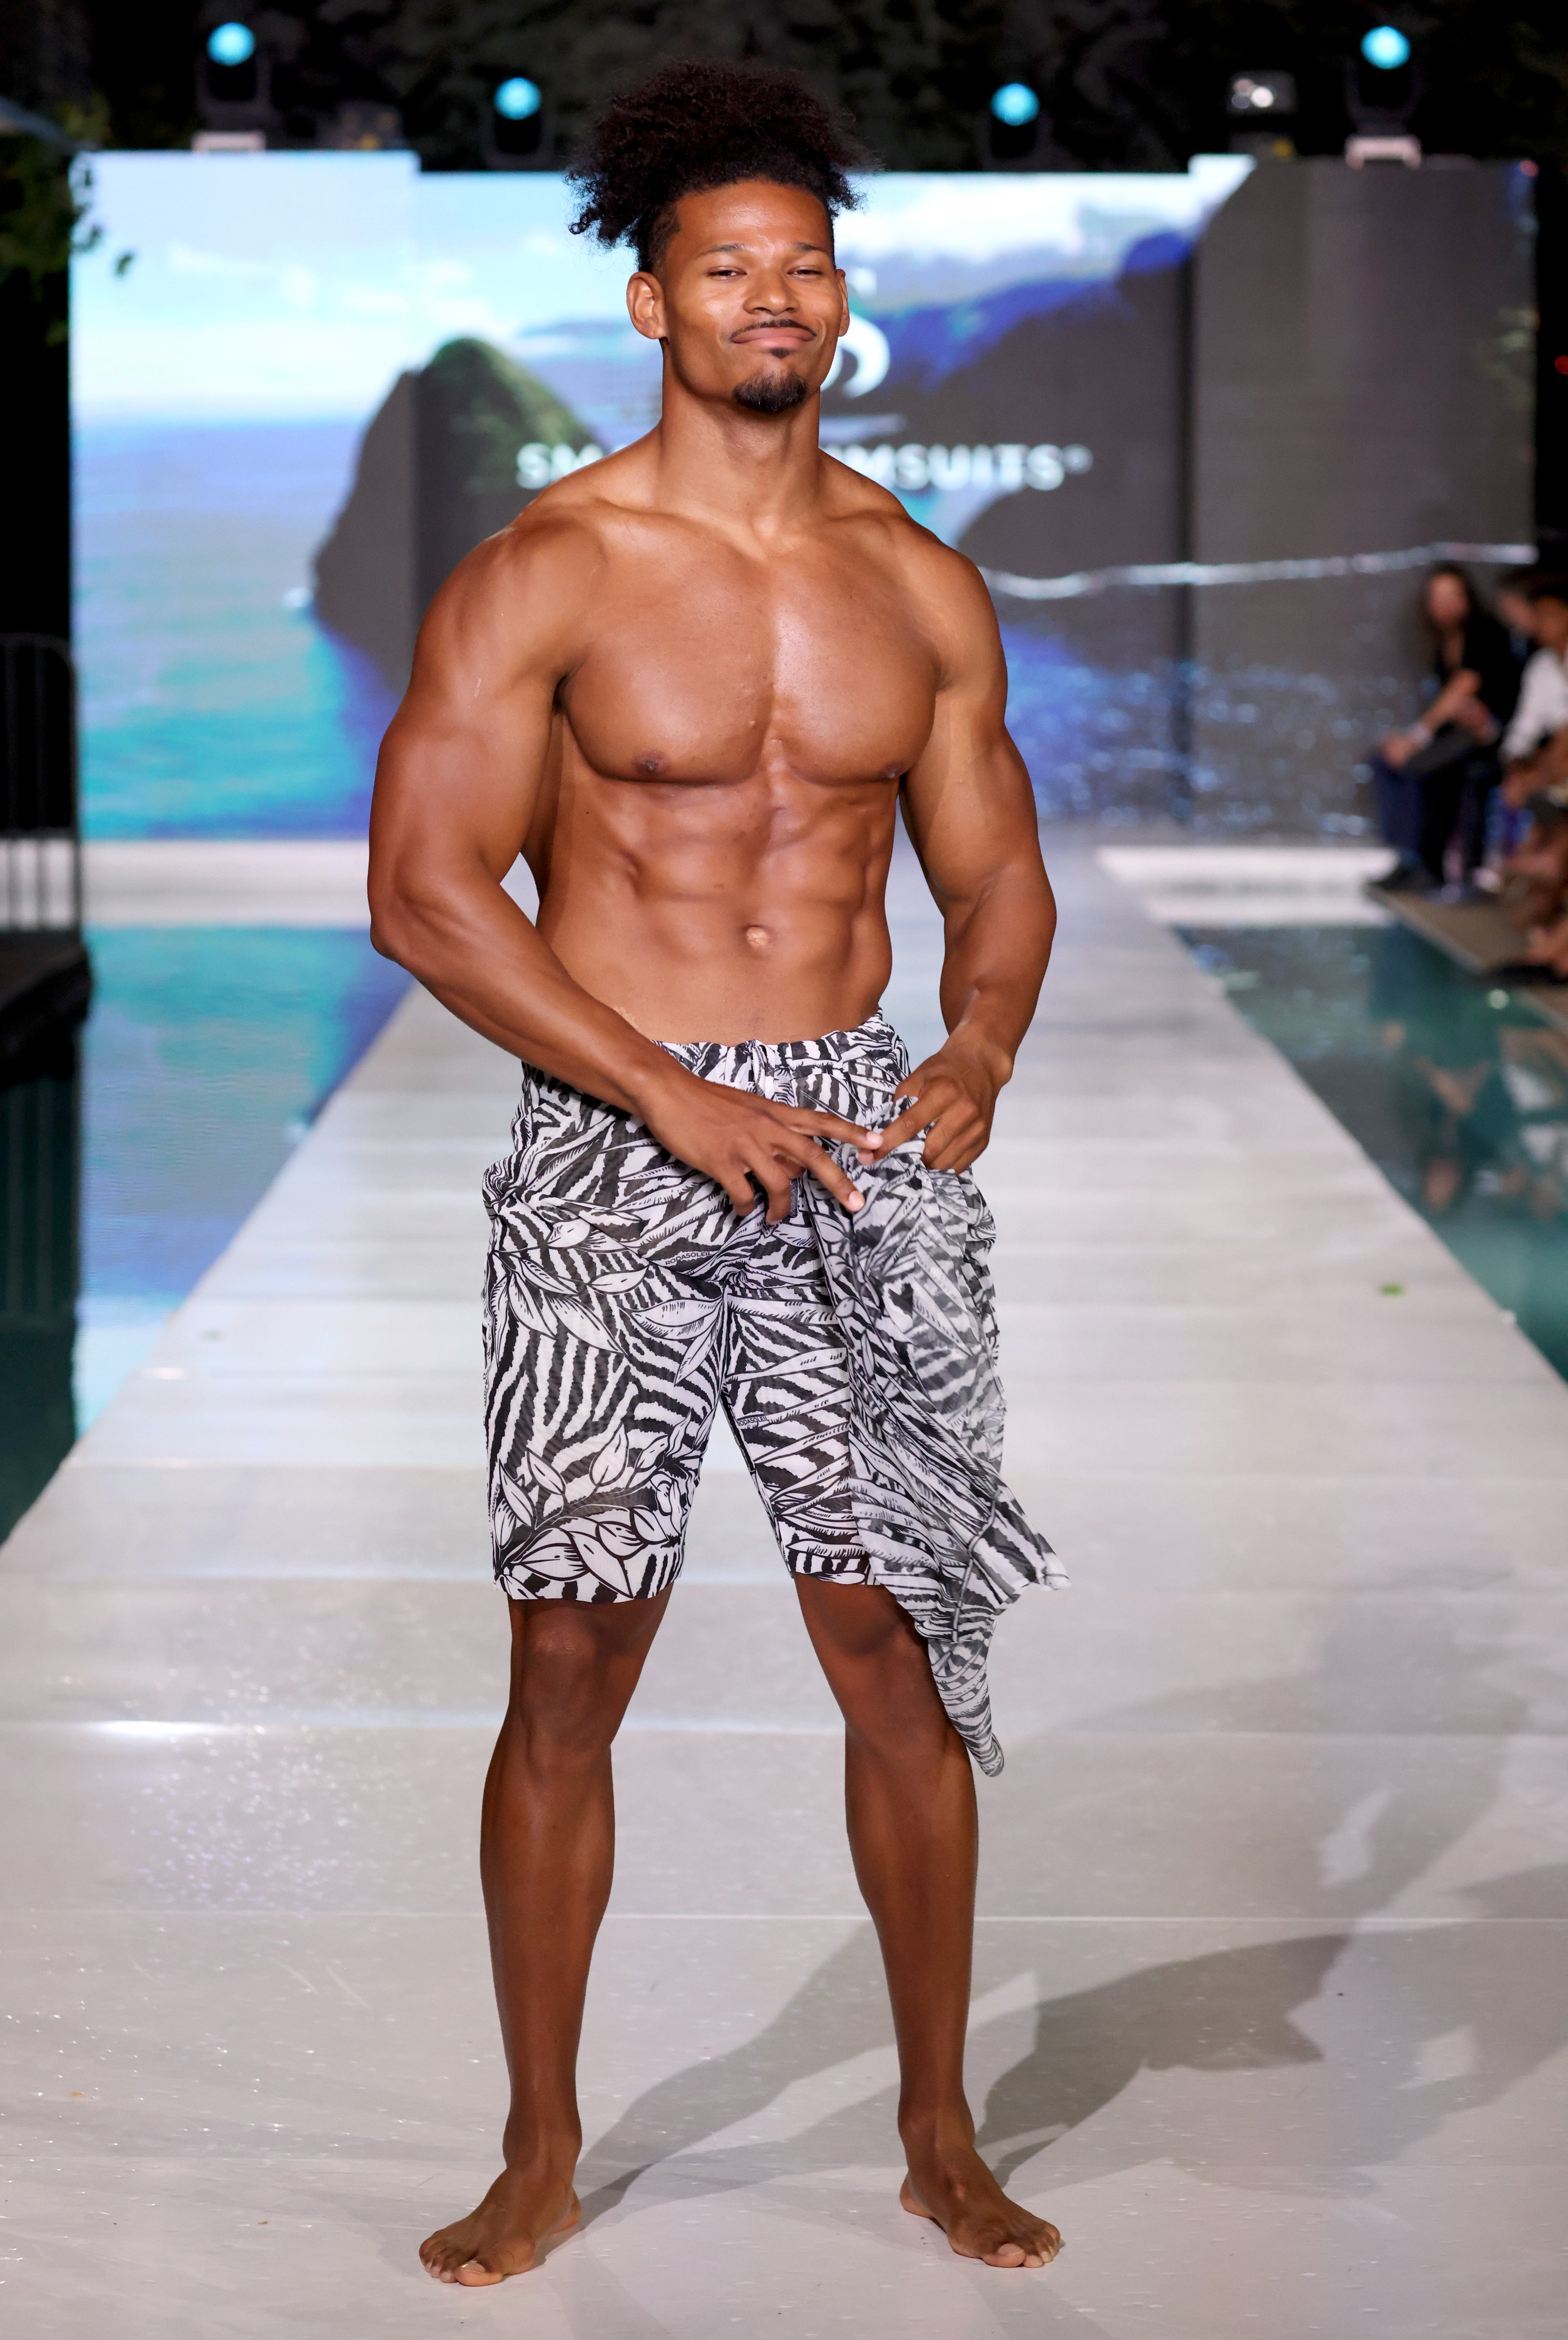 Explore our sustainable beach trunks for men, featuring a stylish Zebra print and SPF35 protection. Designed for classic luxury and eco-friendly comfort. Shop now to enhance your beachwear collection